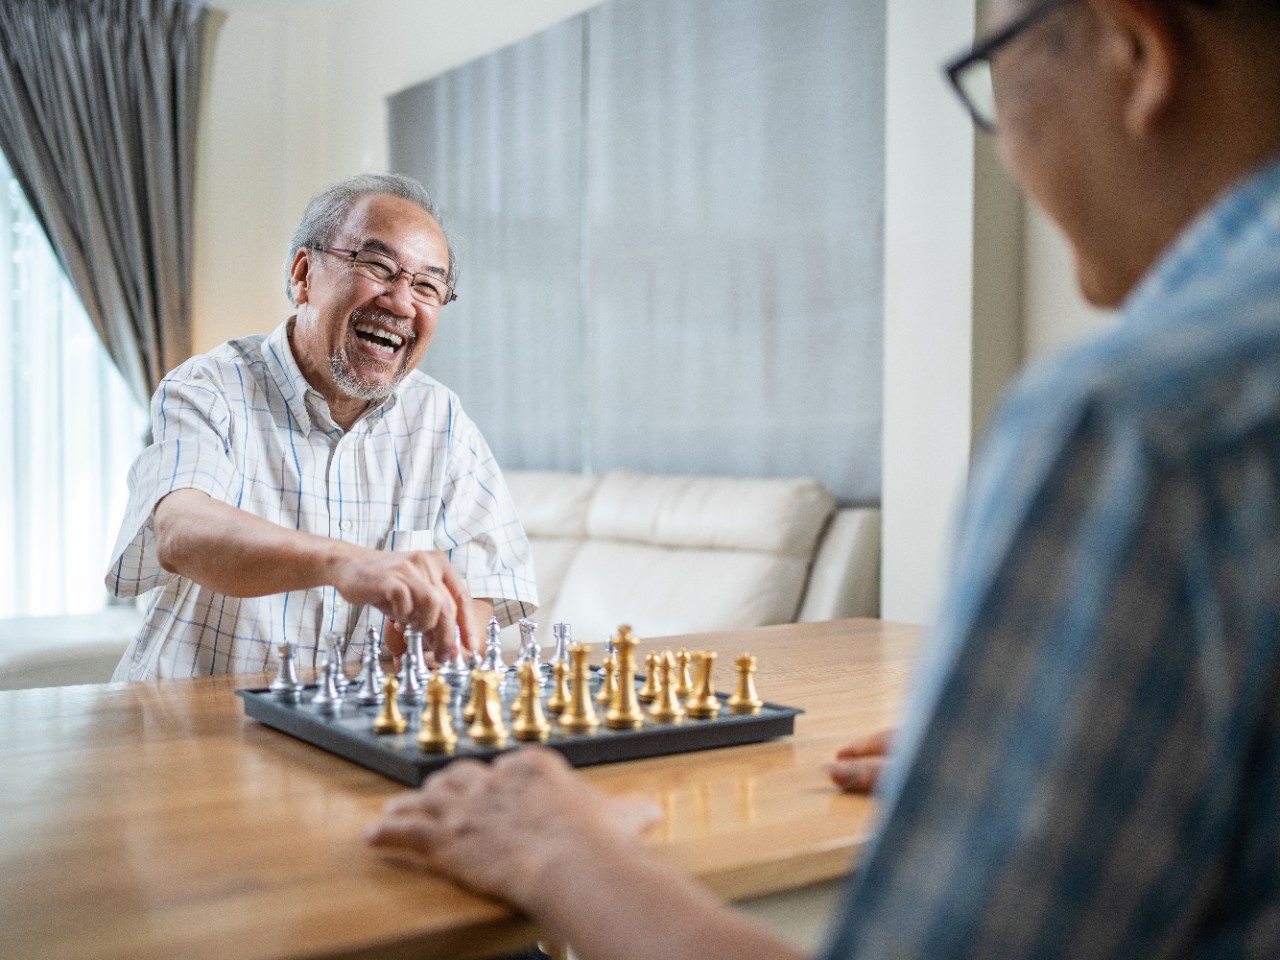 elderly man enjoying playing chess with his friend